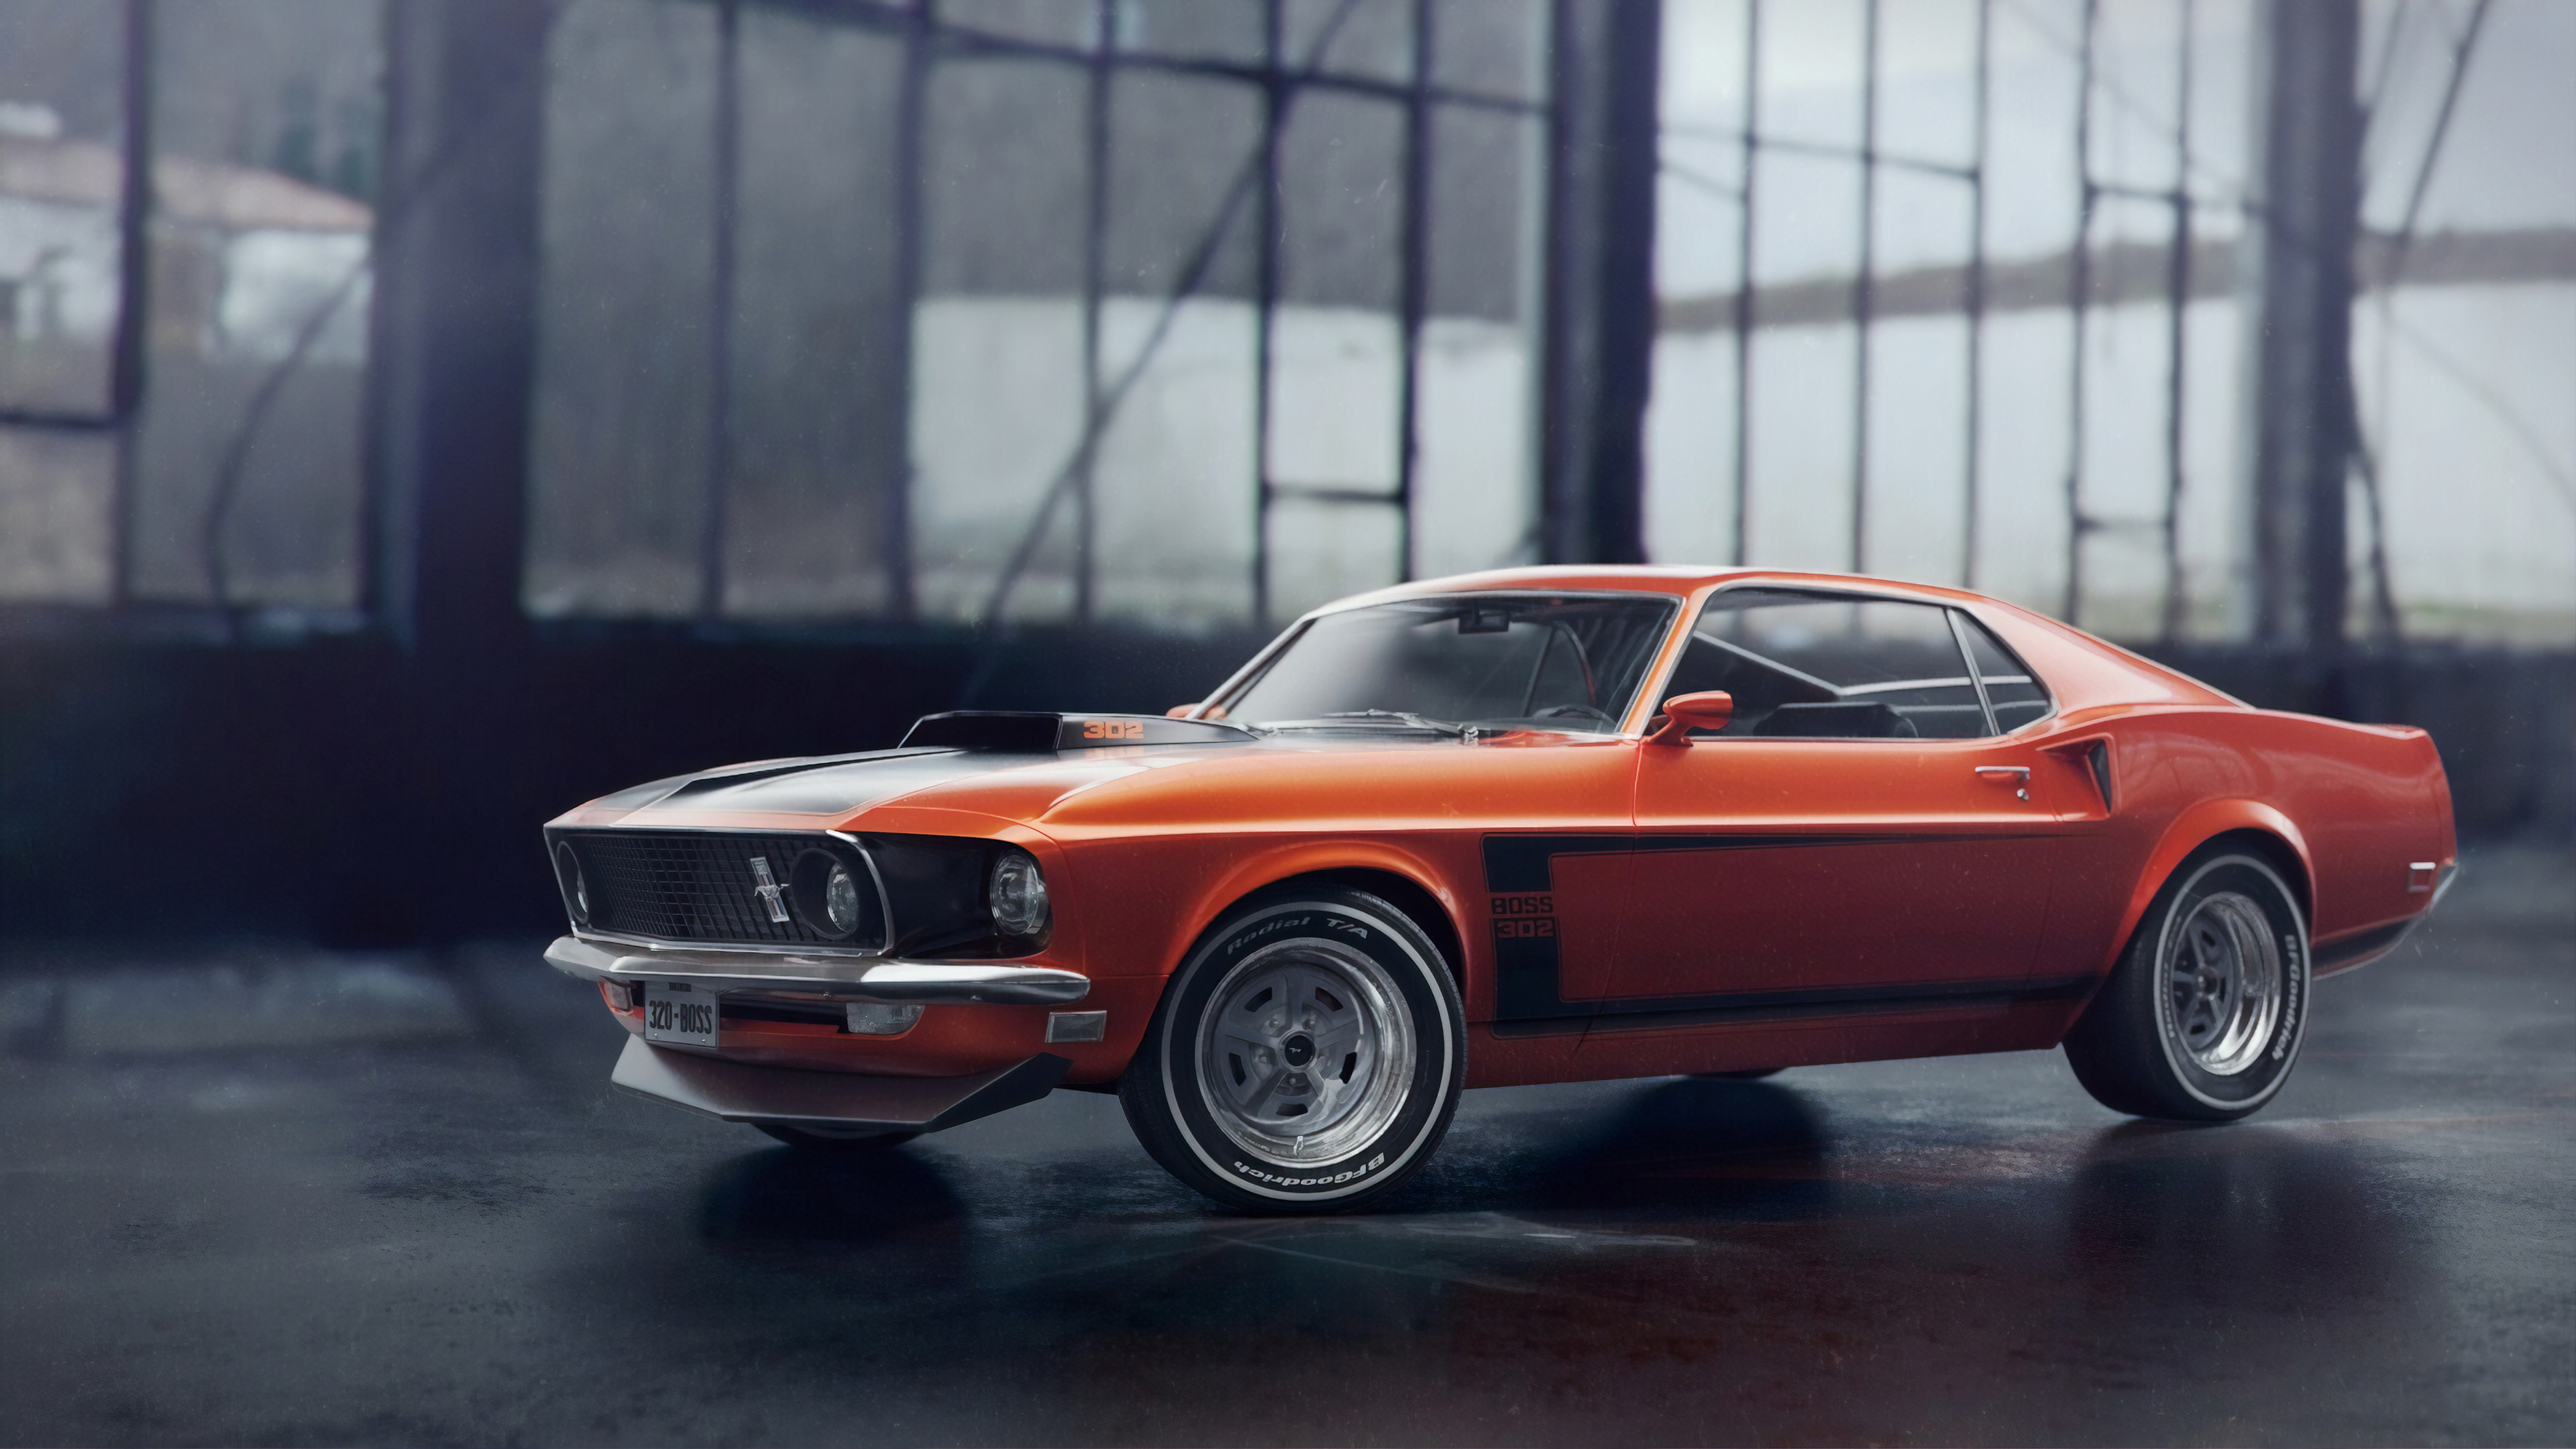 Ford Mustang Boss 302 4k Ultra Hd Wallpaper Background Image 3840x2160